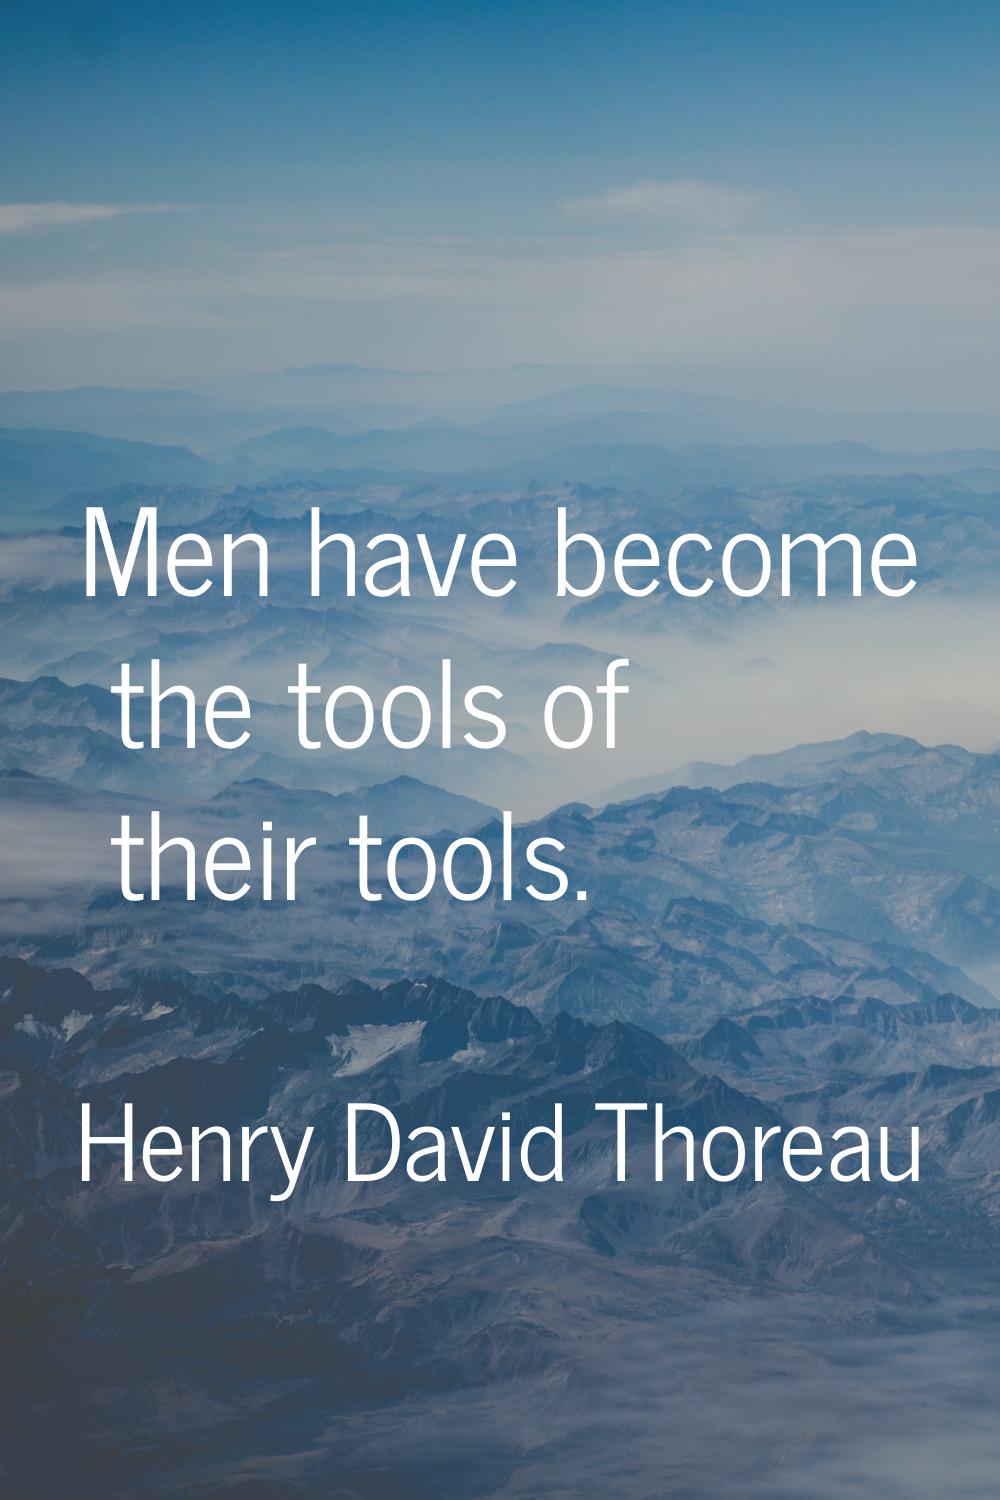 Men have become the tools of their tools.